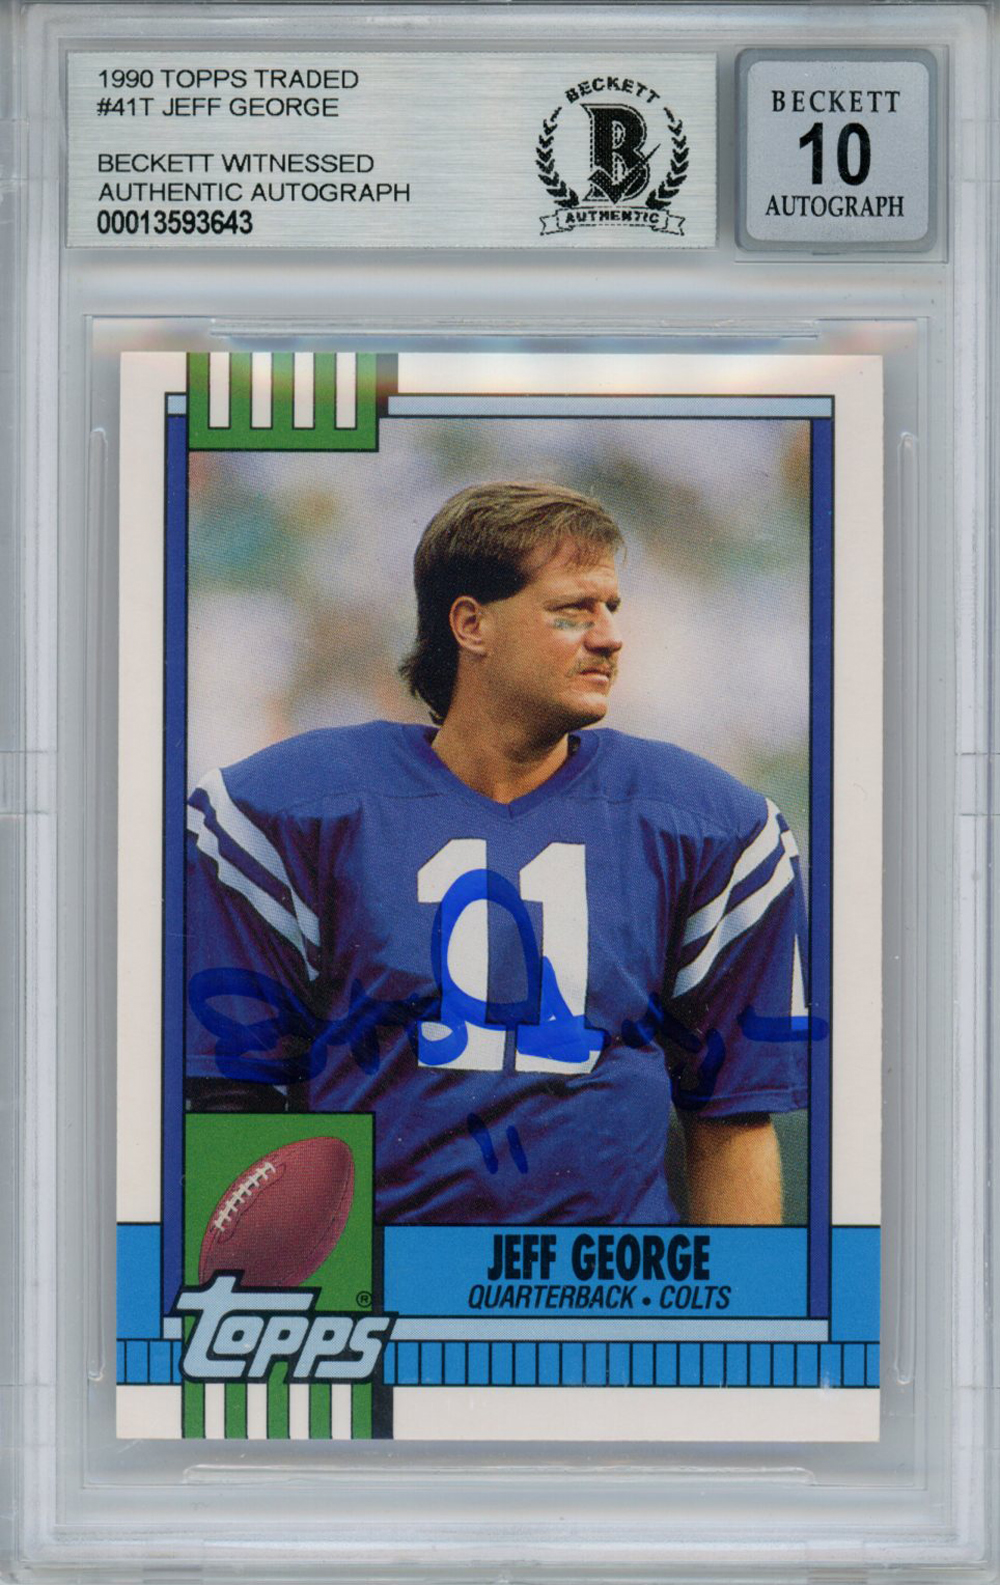 Jeff George Signed 1990 Topps Traded #41T Rookie Card Beckett 10 Slab